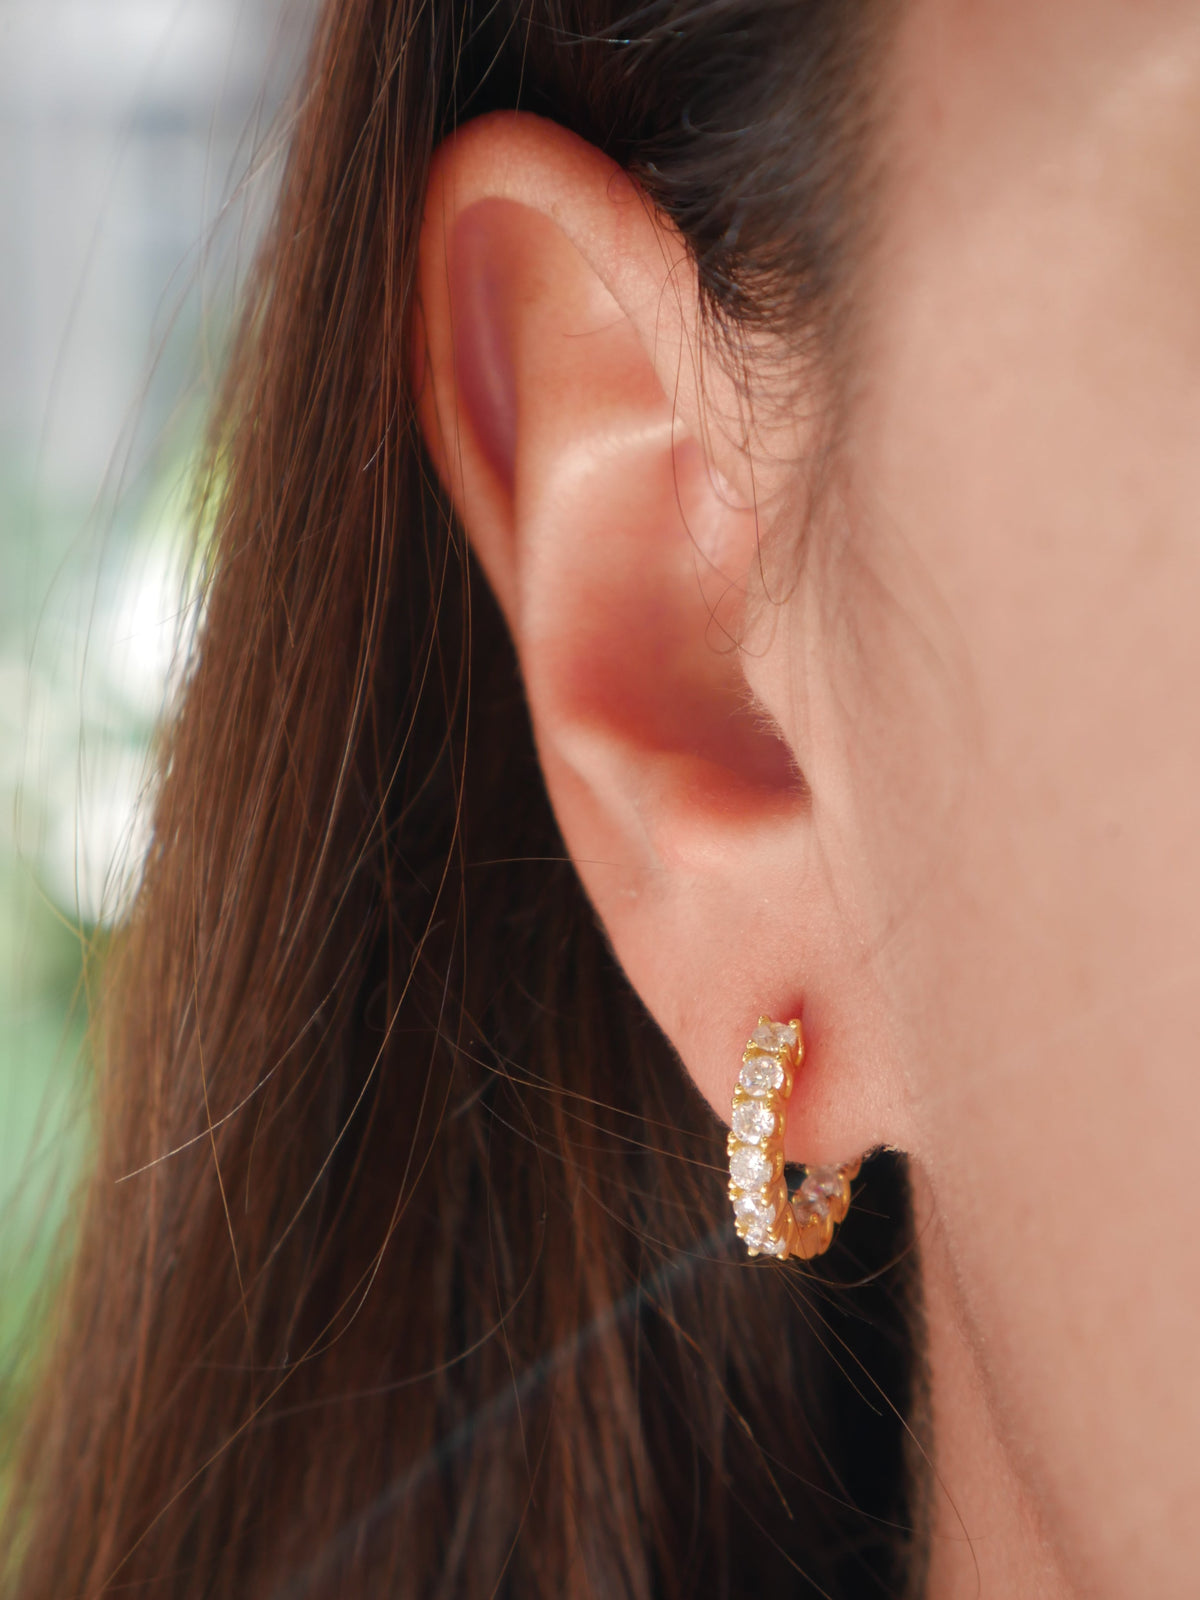 earrings, gold earrings, hoop earrings, gold plated earrings, diamond earrings, hoop earrings, small hoop earrings, nickel free earrings, earrings for sensitive ears, .925 sterling silver earrings, luxury, designer, fashion jewelry, accessories, gift ideas, affordable jewelry, fine jewelry, popular, white gold earrings, huggie earrings . silver earrings, statement earrings, jewelry, accessories, small hoop earrings with rhinestones, statement earrings , fashion jewelry, trending on titkok, gift ideas